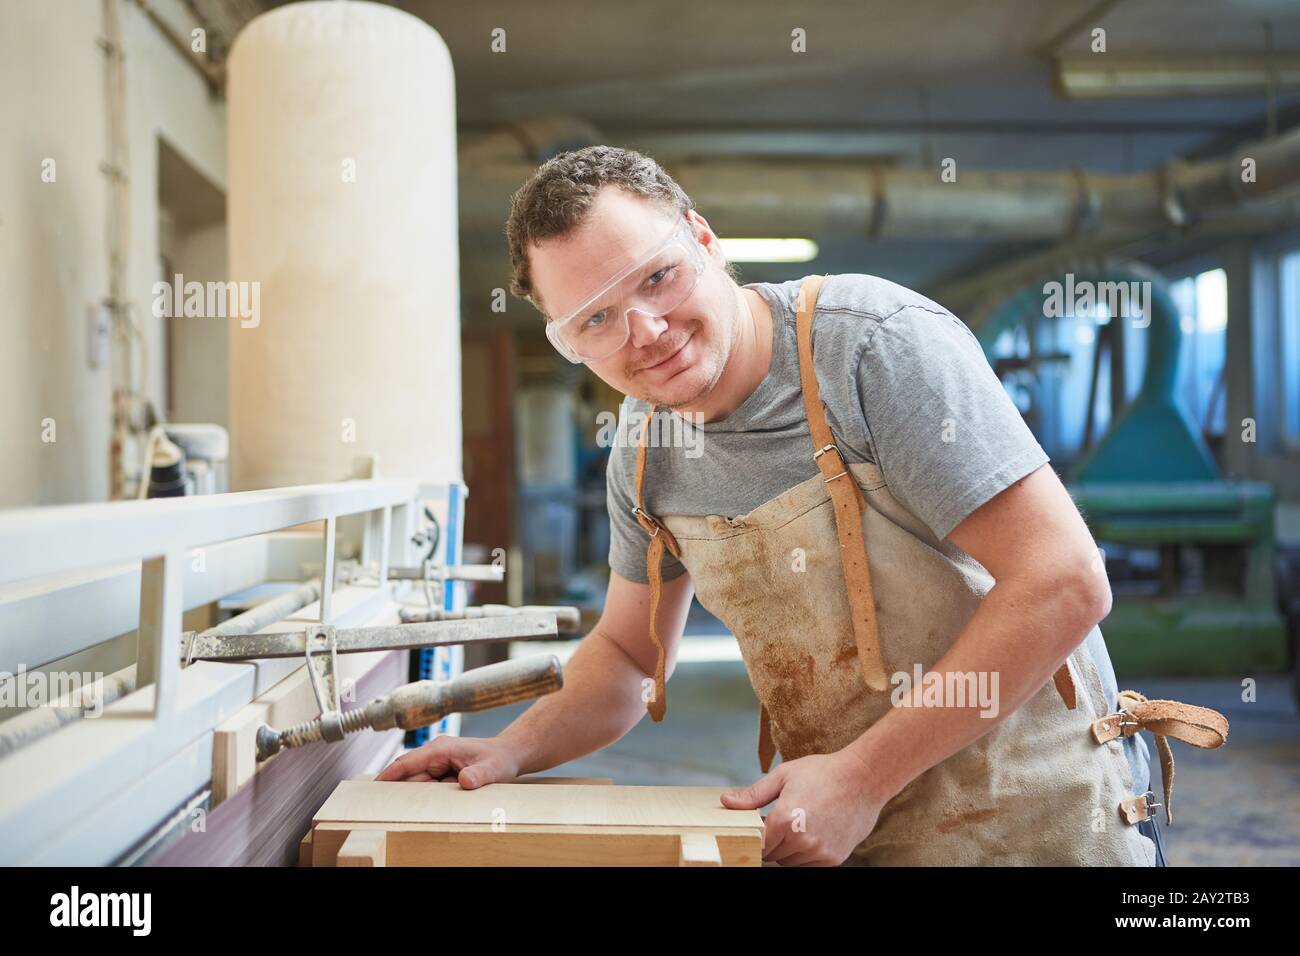 Carpenter with safety glasses works on the grinding machine with a wooden workpiece Stock Photo